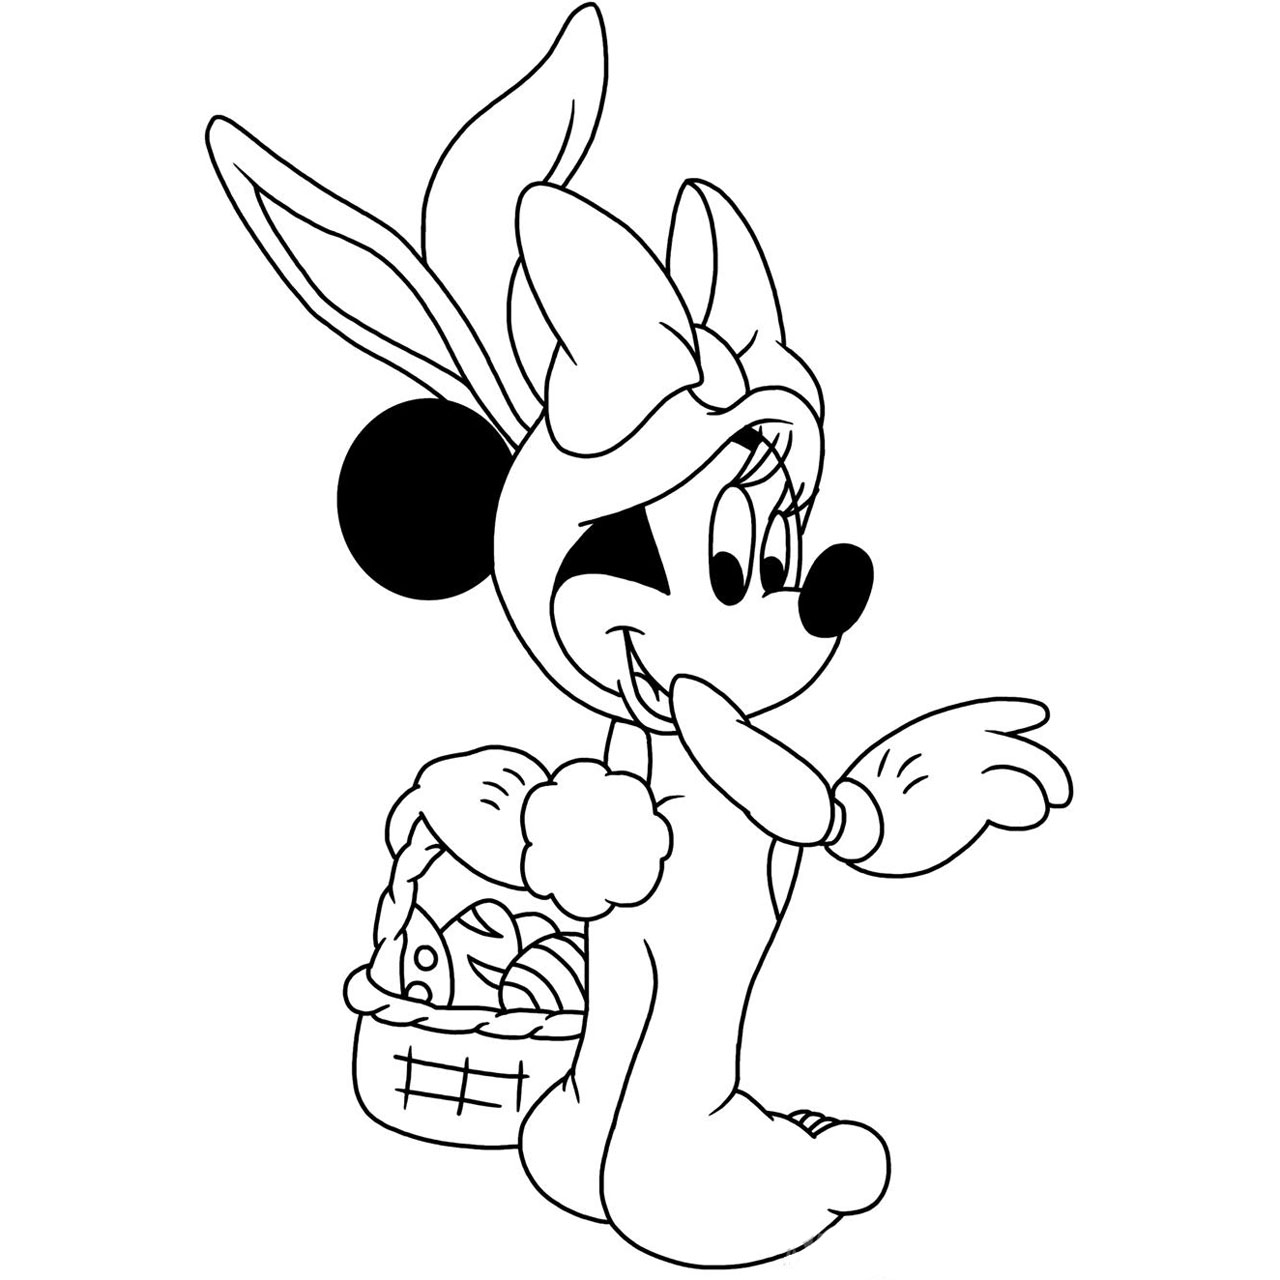 Free Disney Easter Coloring Pages Minnie Mouse with Easter Basket of Eggs printable